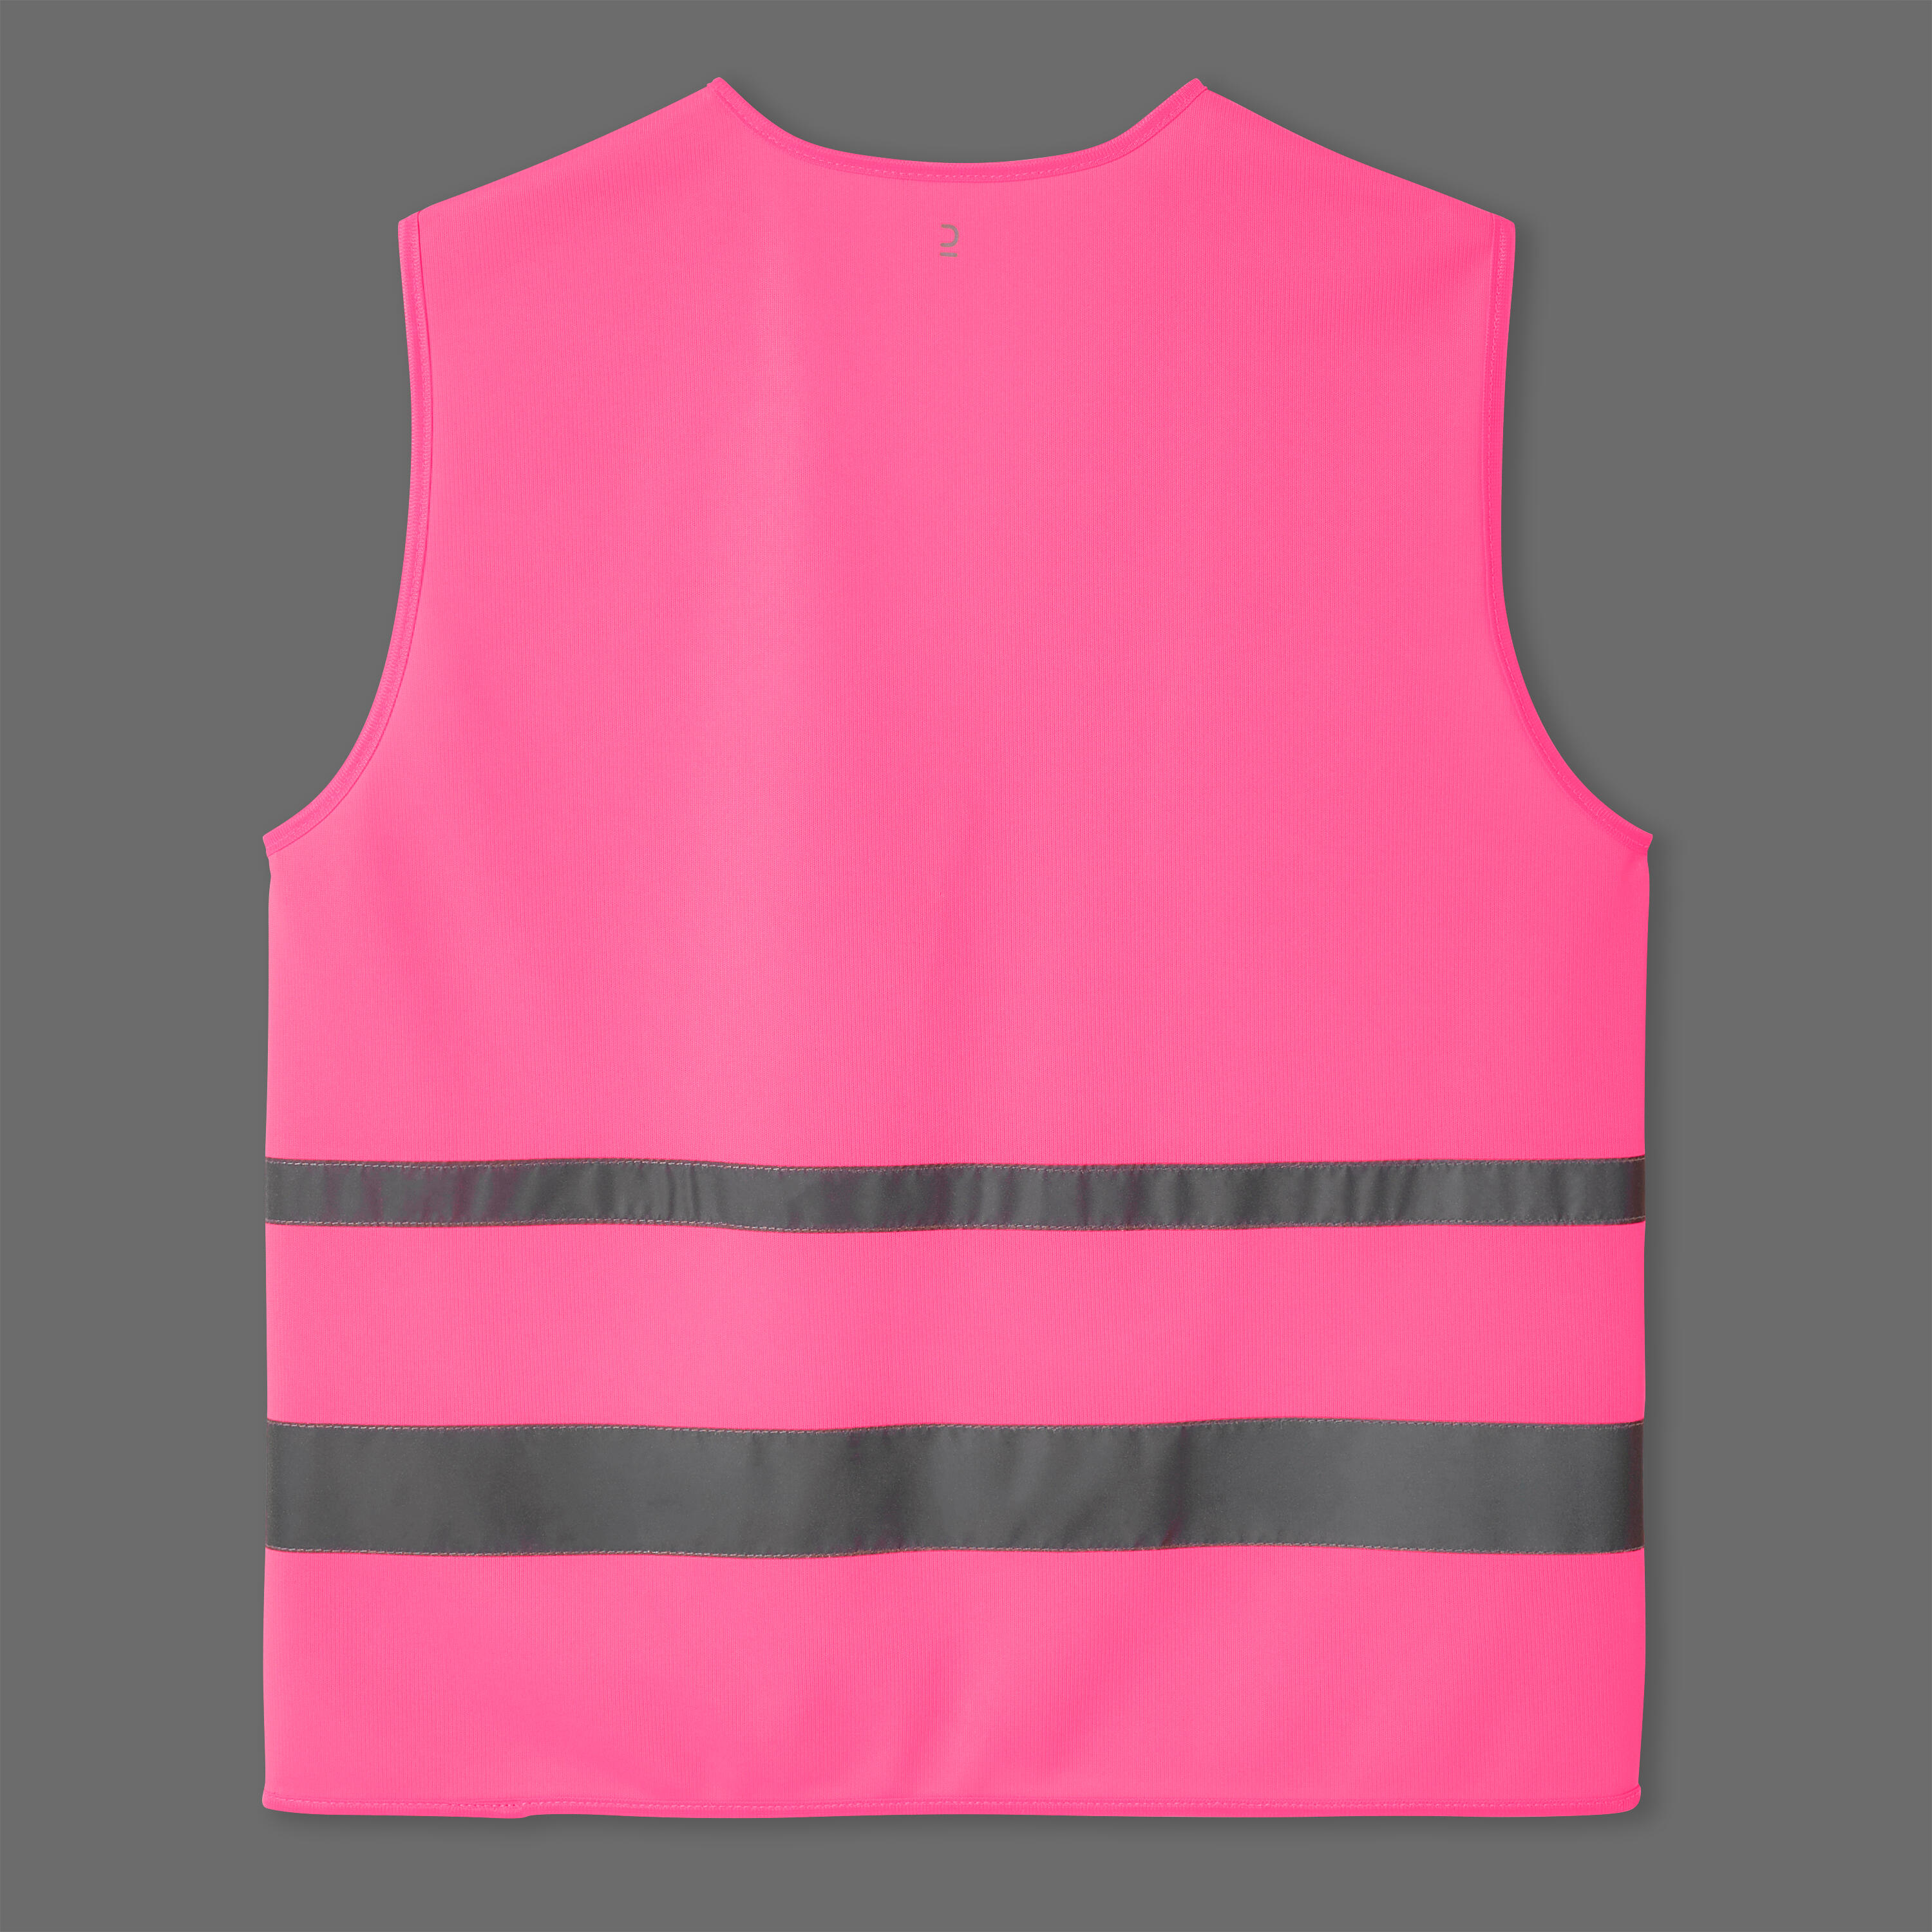 Adult High Visibility Cycling Safety Vest - Neon Pink 2/3